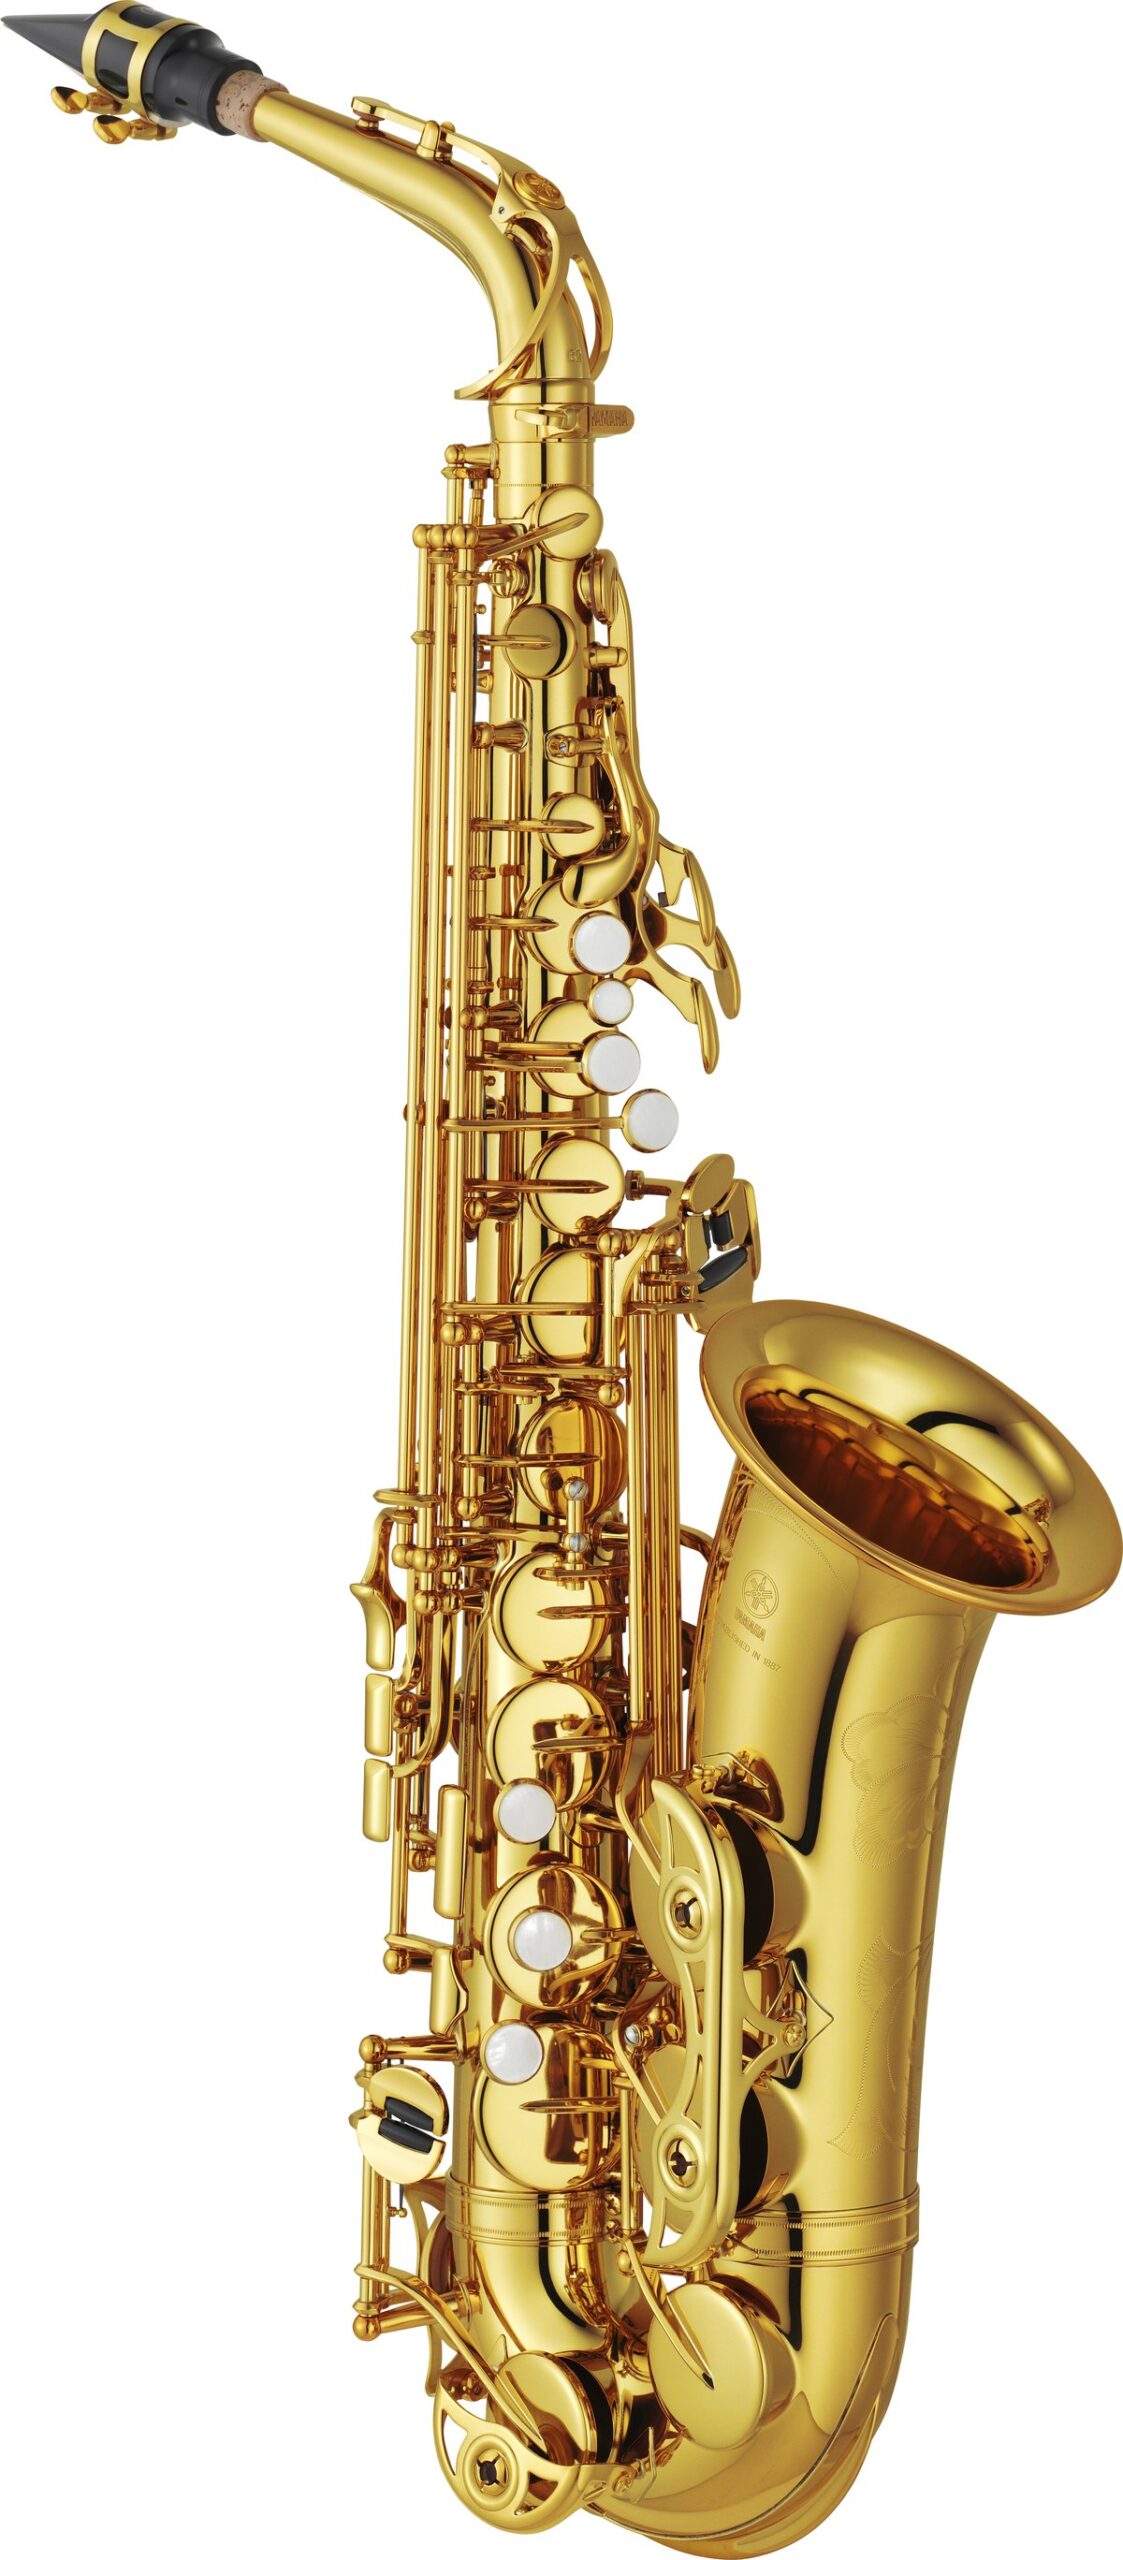 Is the Saxophone a Woodwind or a Brass Instrument?